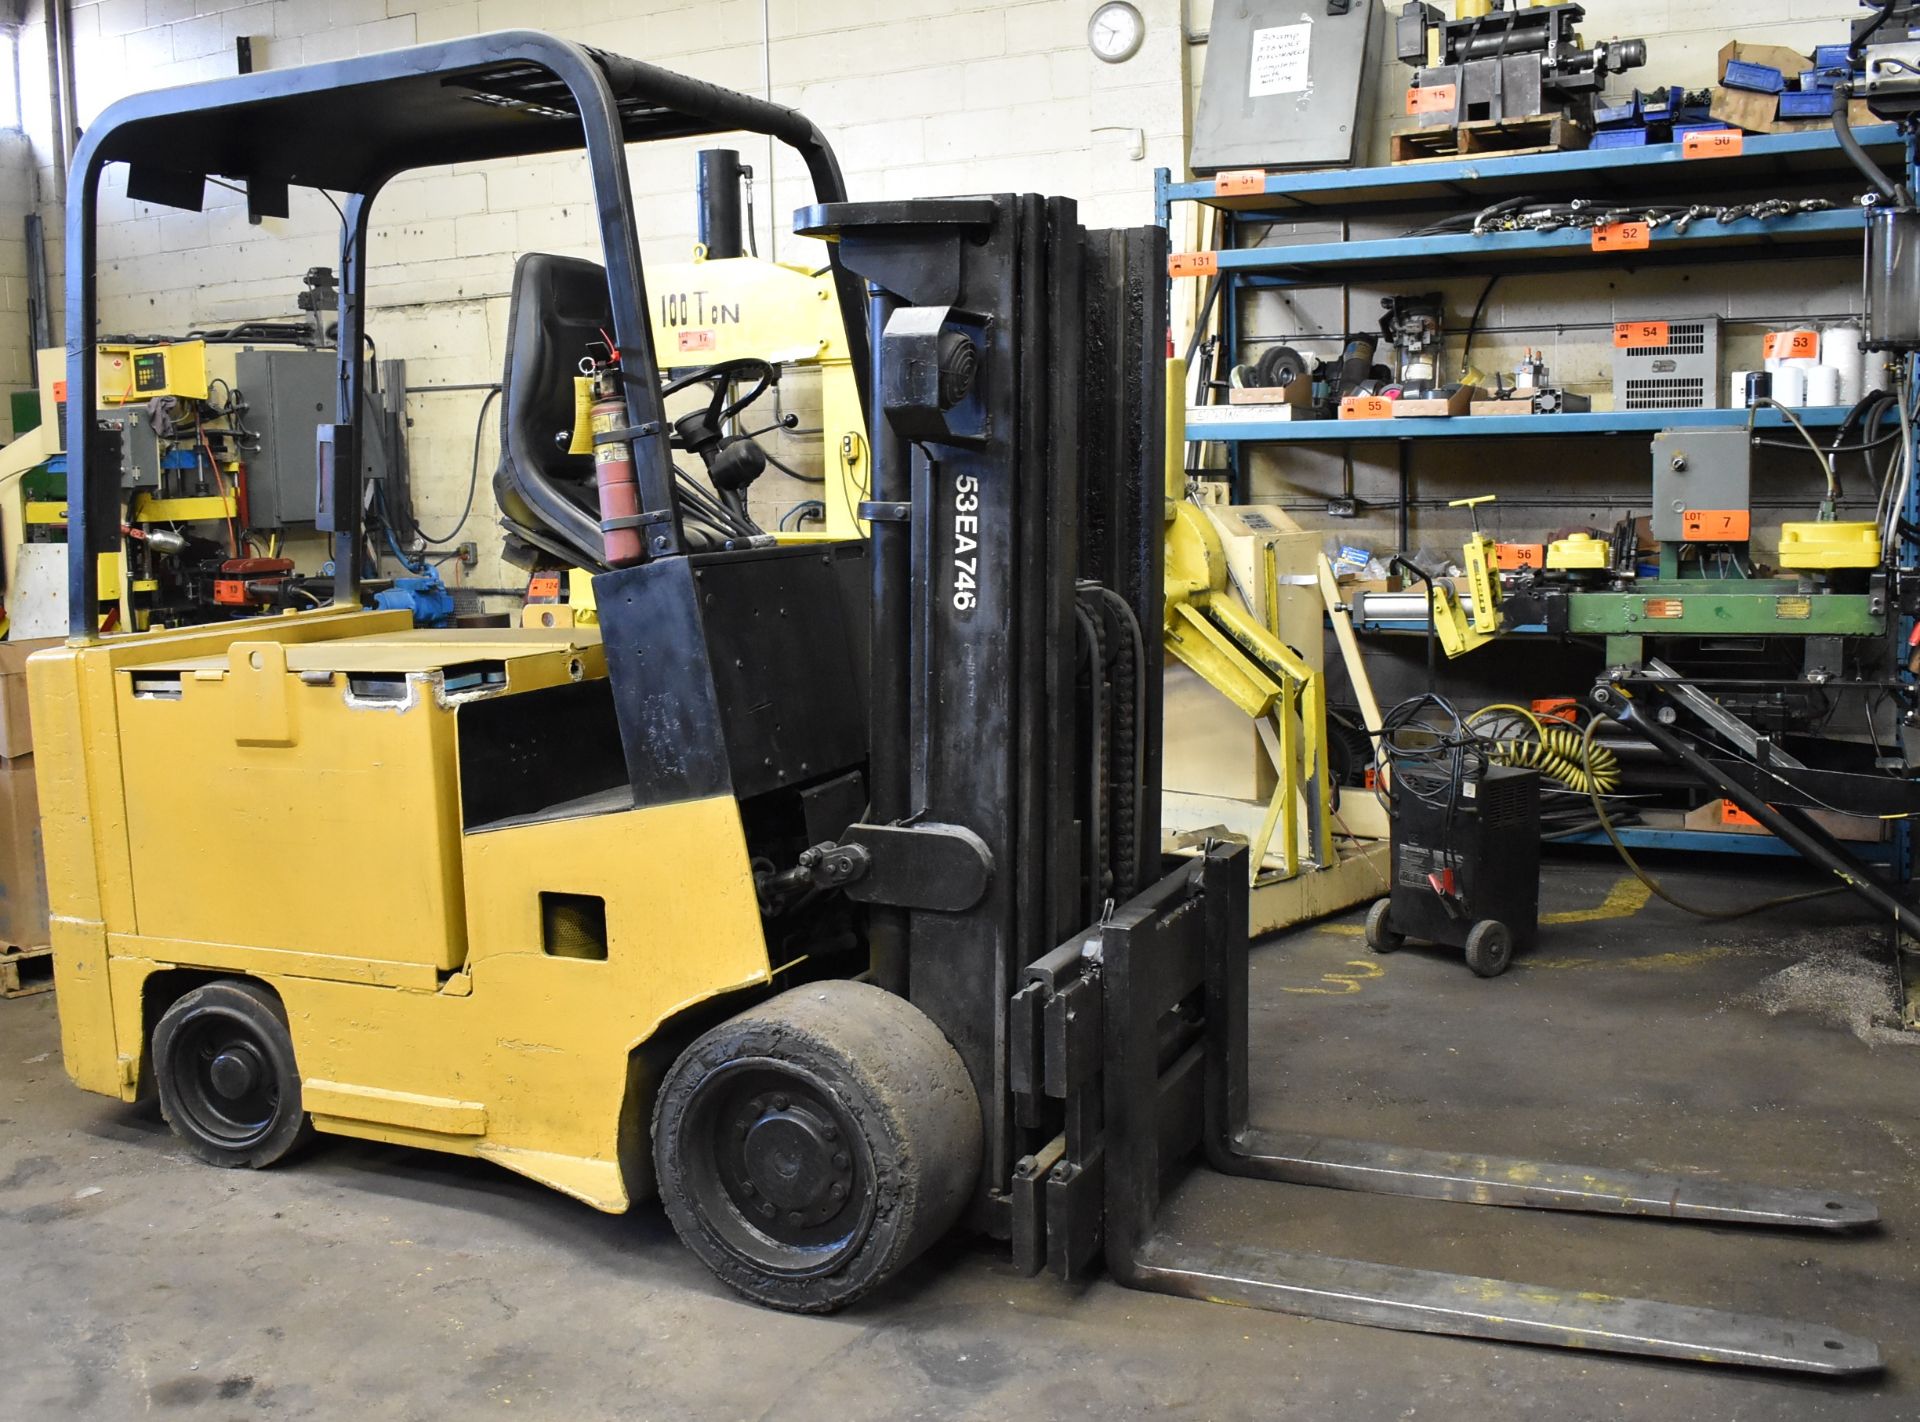 YALE ERC080HBN36SE075SR 36V ELECTRIC FORKLIFT WITH 8000LB CAPACITY, 155" MAX. LIFT HEIGHT, 3 STAGE